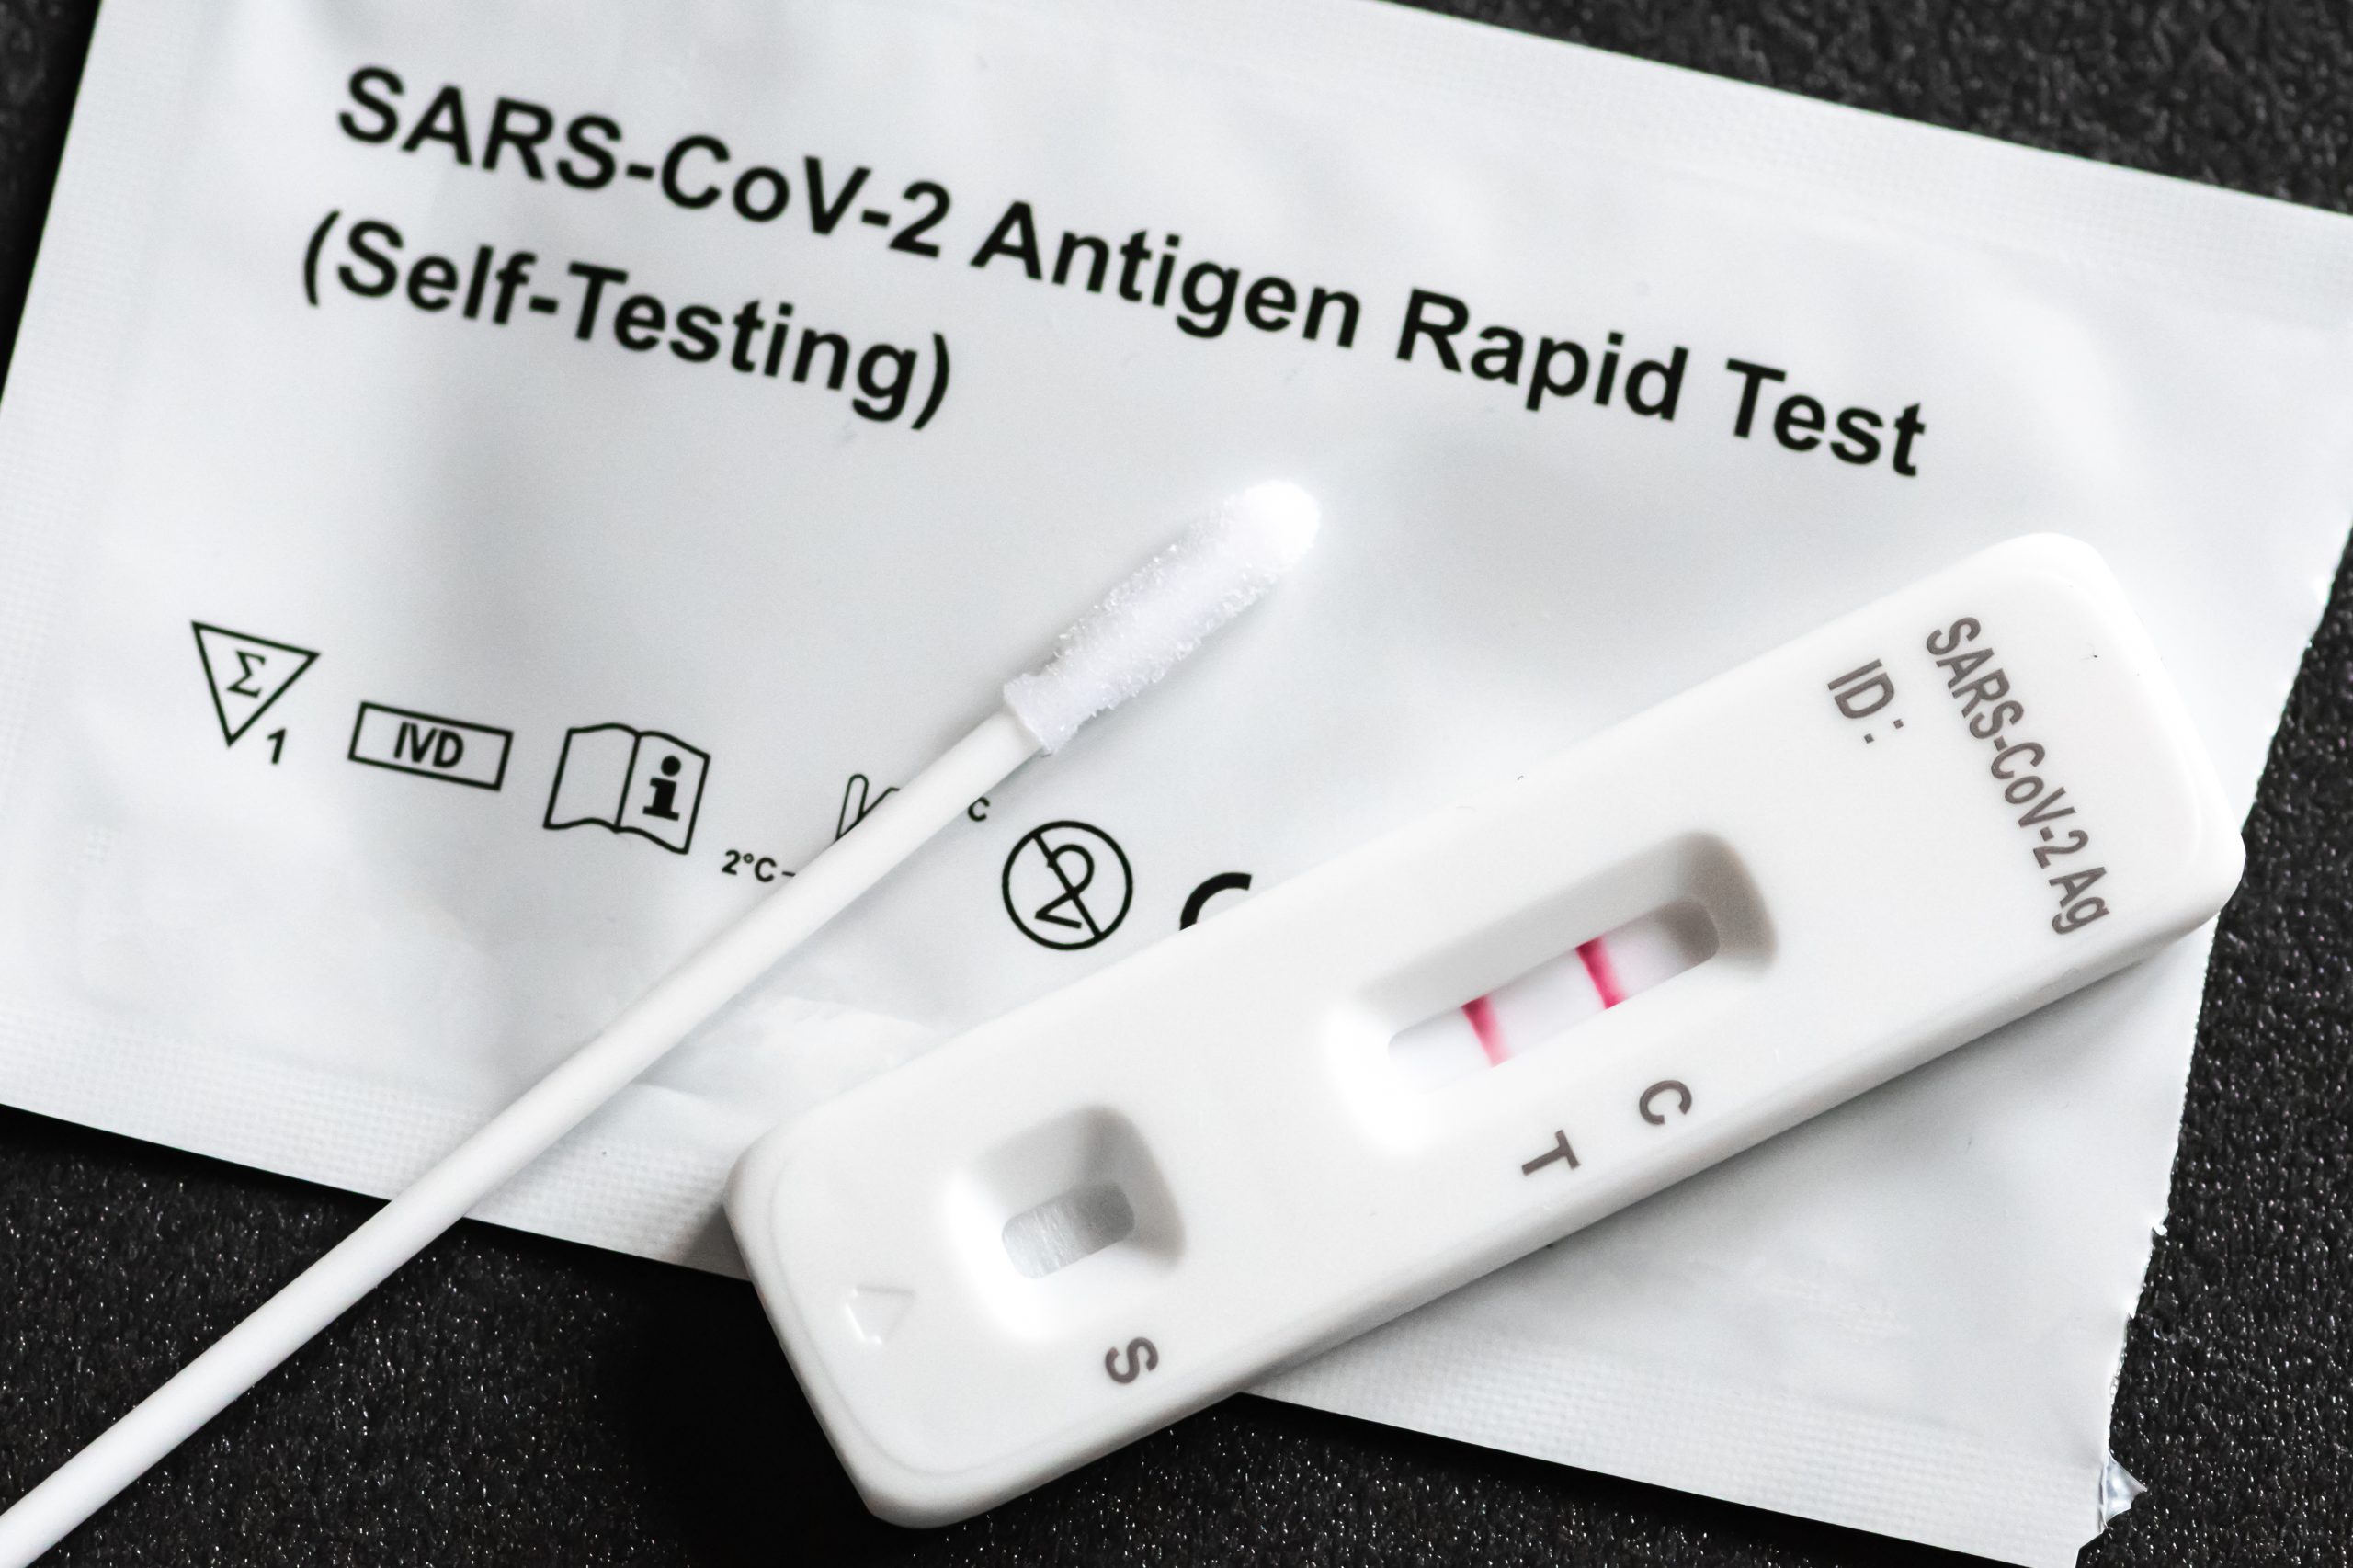 A COVID-19 rapid antigen test kit. A nasal swab and positive test cassette sit on top of the packet that has been torn open.